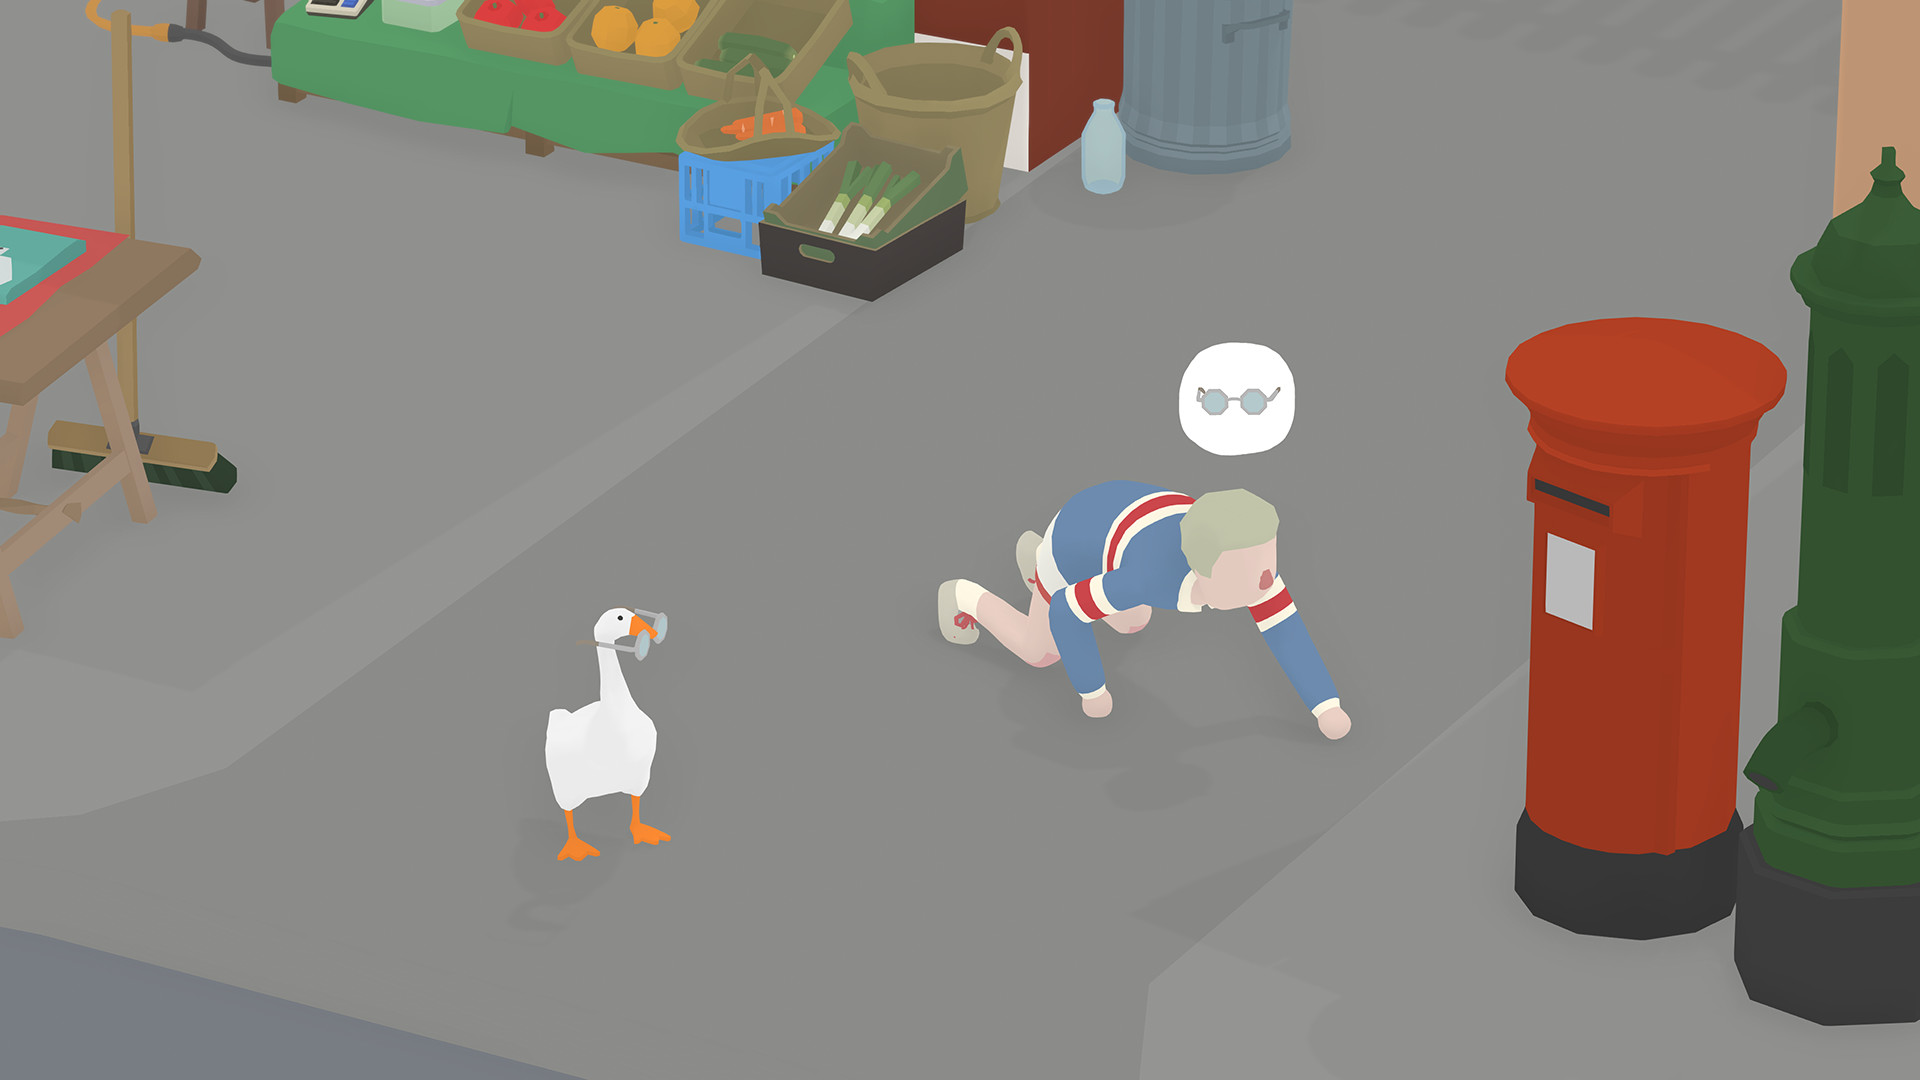 A boy crawling around looking for his glasses, which are held by a goose.